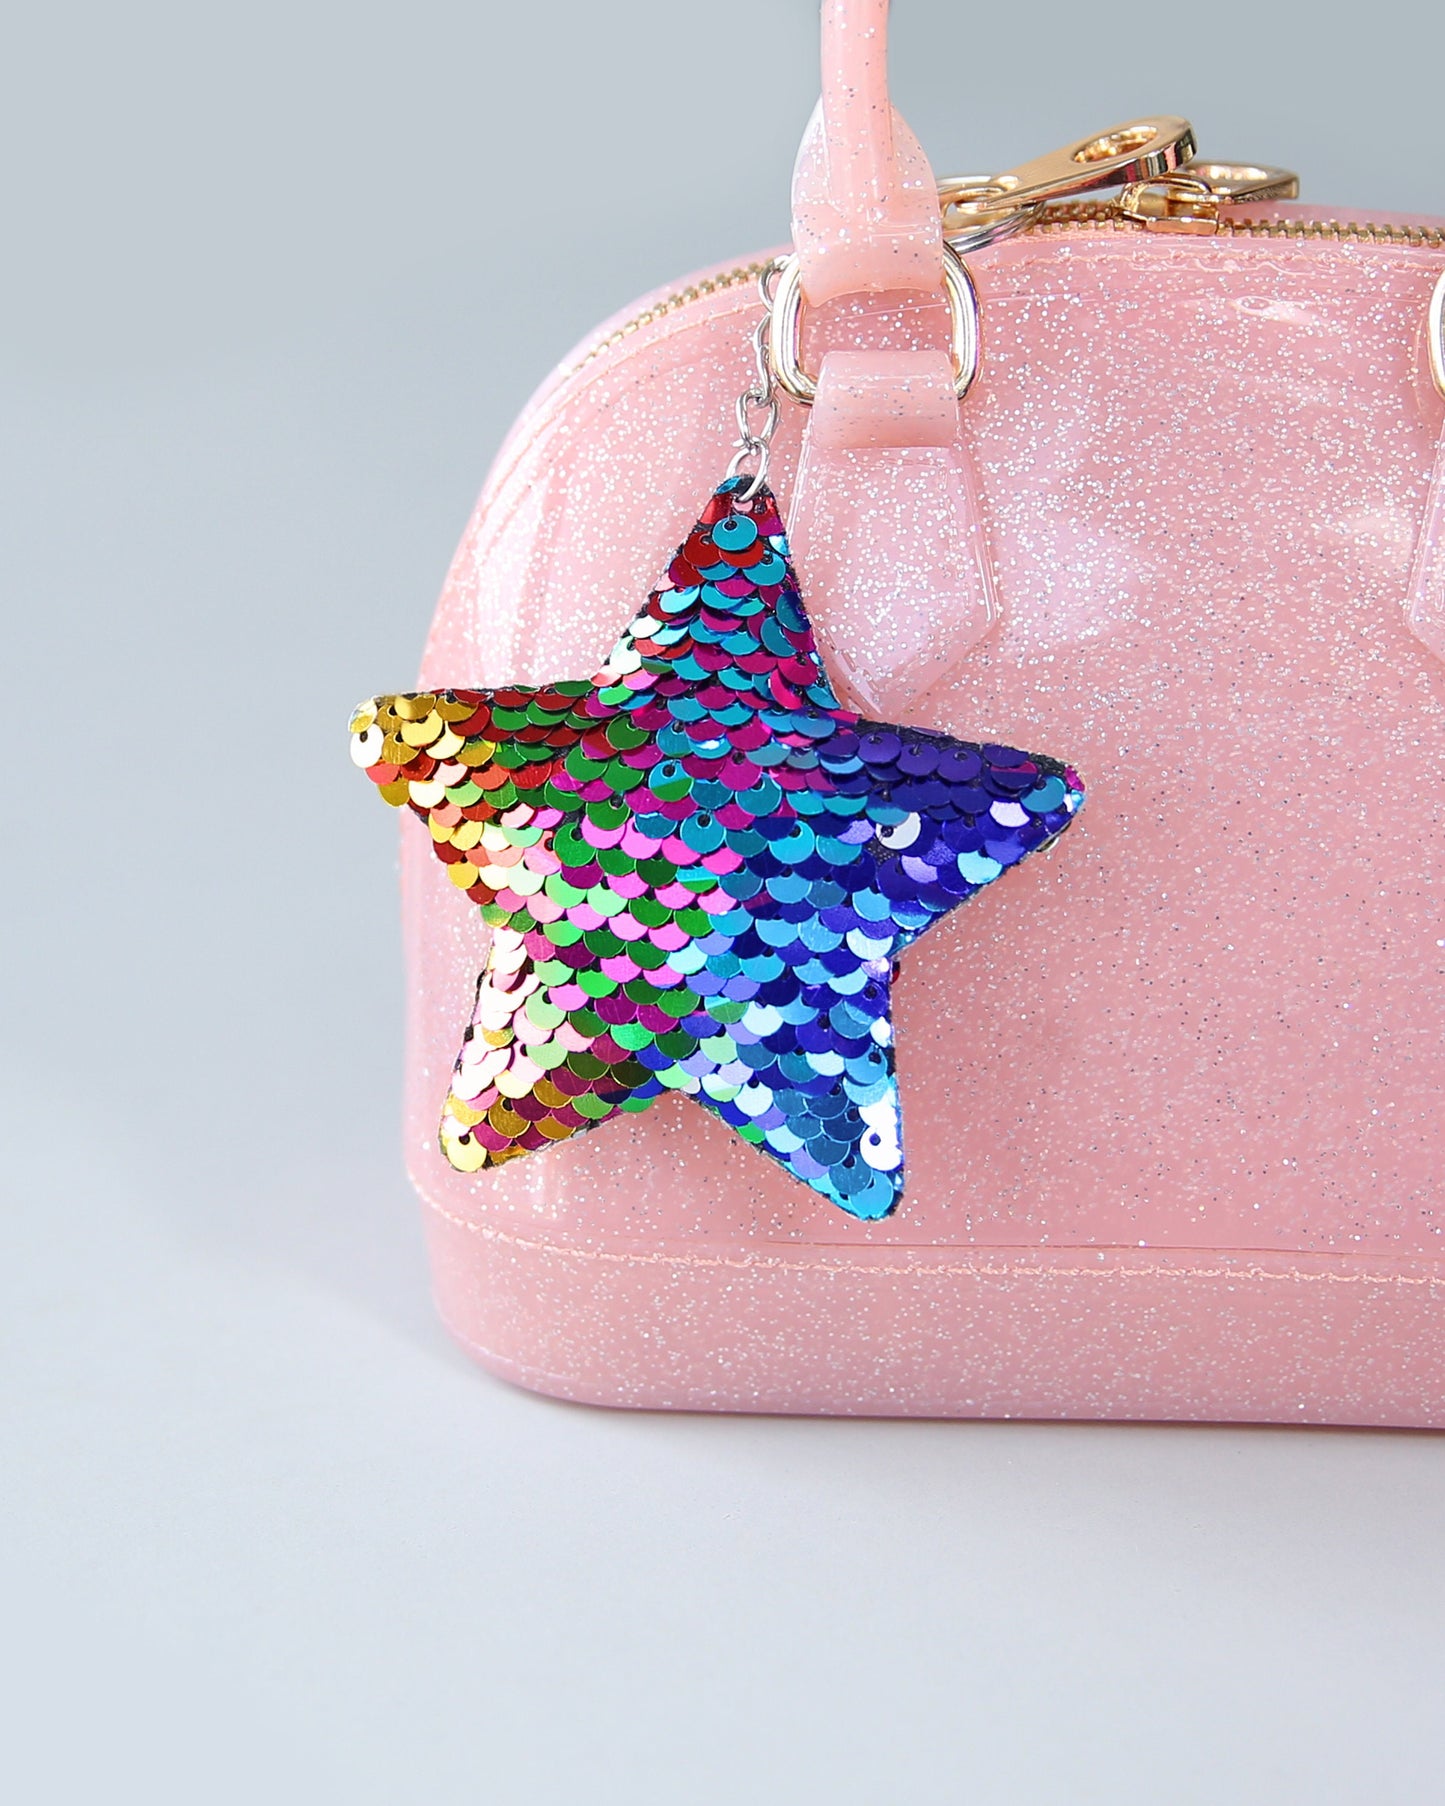 Rainbow Sequin Star Keychain- Sequin Keychain, backpack charm, party favor, gift for her, stocking stuffer, birthday gift, rainbow, star